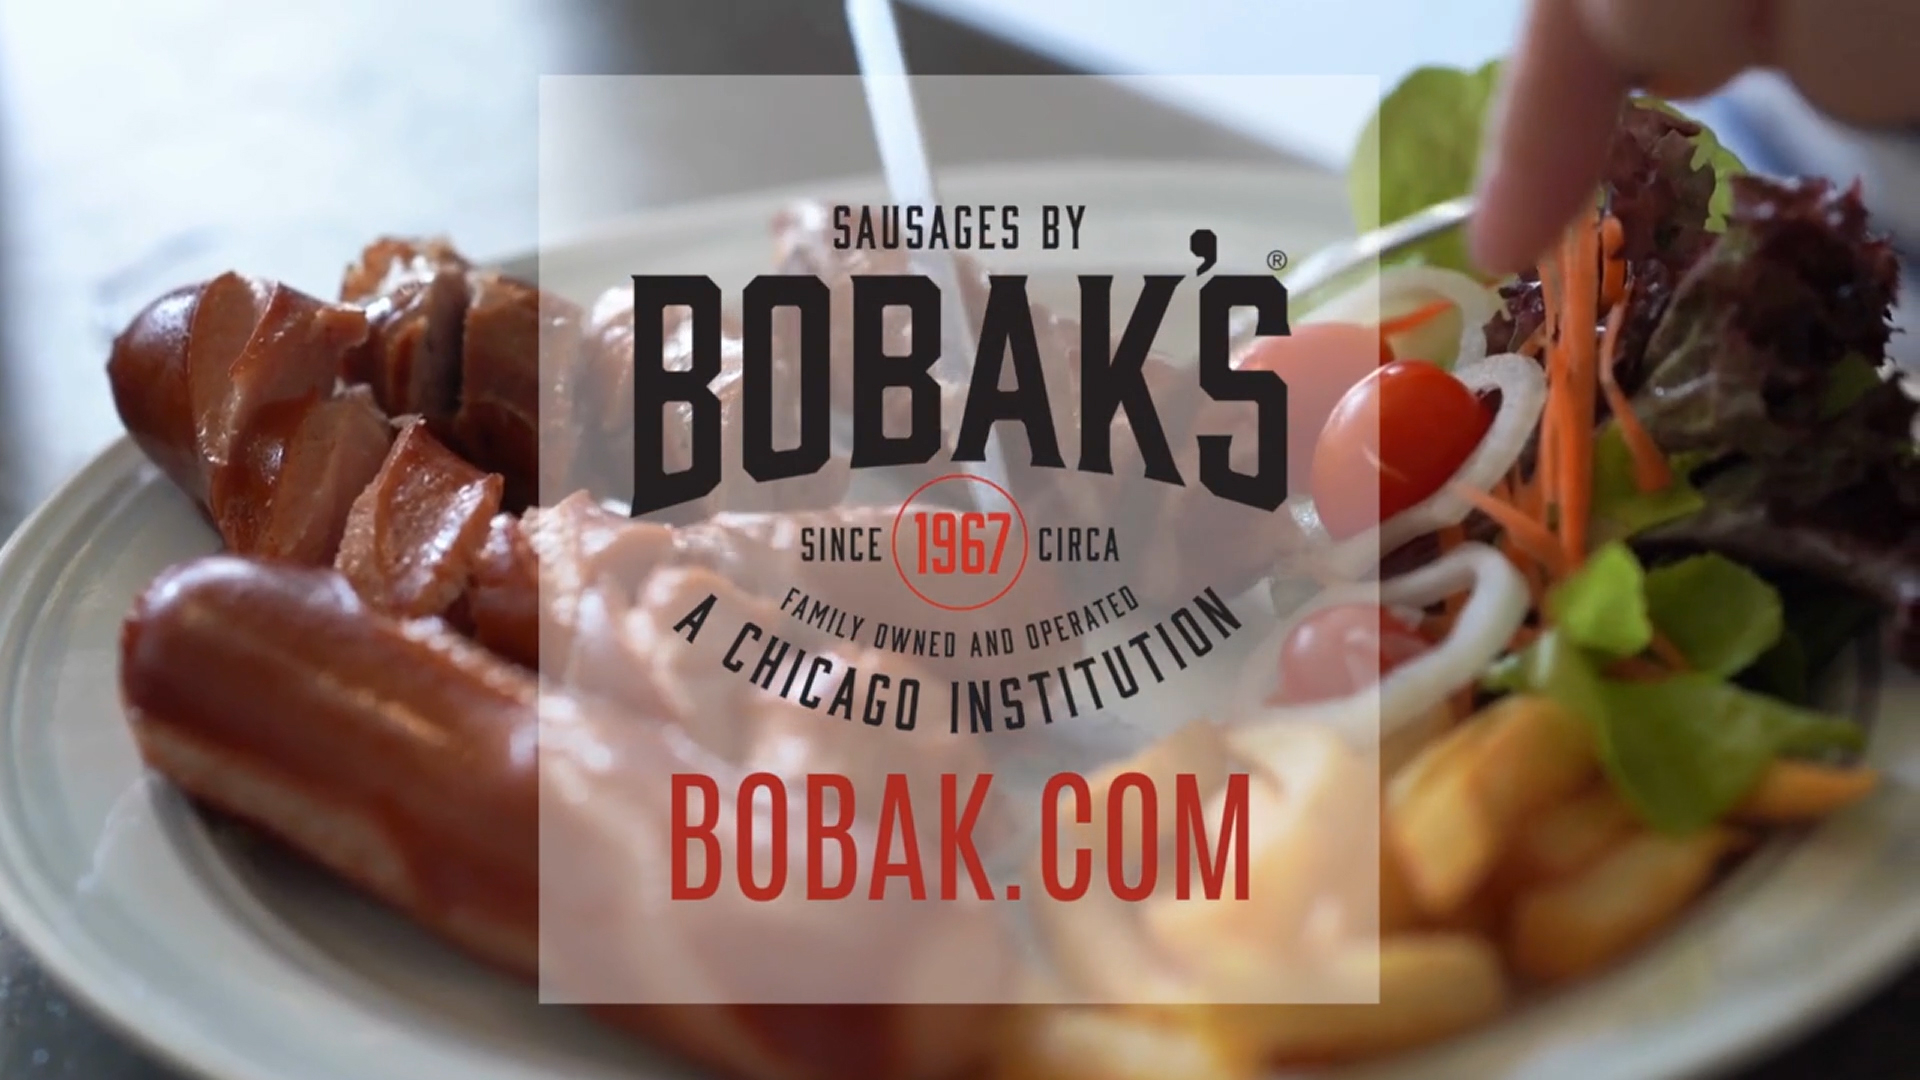 Experience the rich heritage of Chicago with Bobak's new array of home-cooked flavors, a tribute to over 50 years of culinary excellence. Dive into the heart of Chicago's culinary traditions with these tantalizing new flavors, now available in Chicagoland grocery stores. Elevate your culinary adventures with the tantalizing selection of Bobak’s Maxwell Polish, Bobak’s Smoked Polish, Bobak’s Smoked Brat, Bobak’s Smoked Cheddar, Bobak’s Mild Italian, and Bobak’s Beef Polish. Visit bobak.com and find a retail outlet near you.